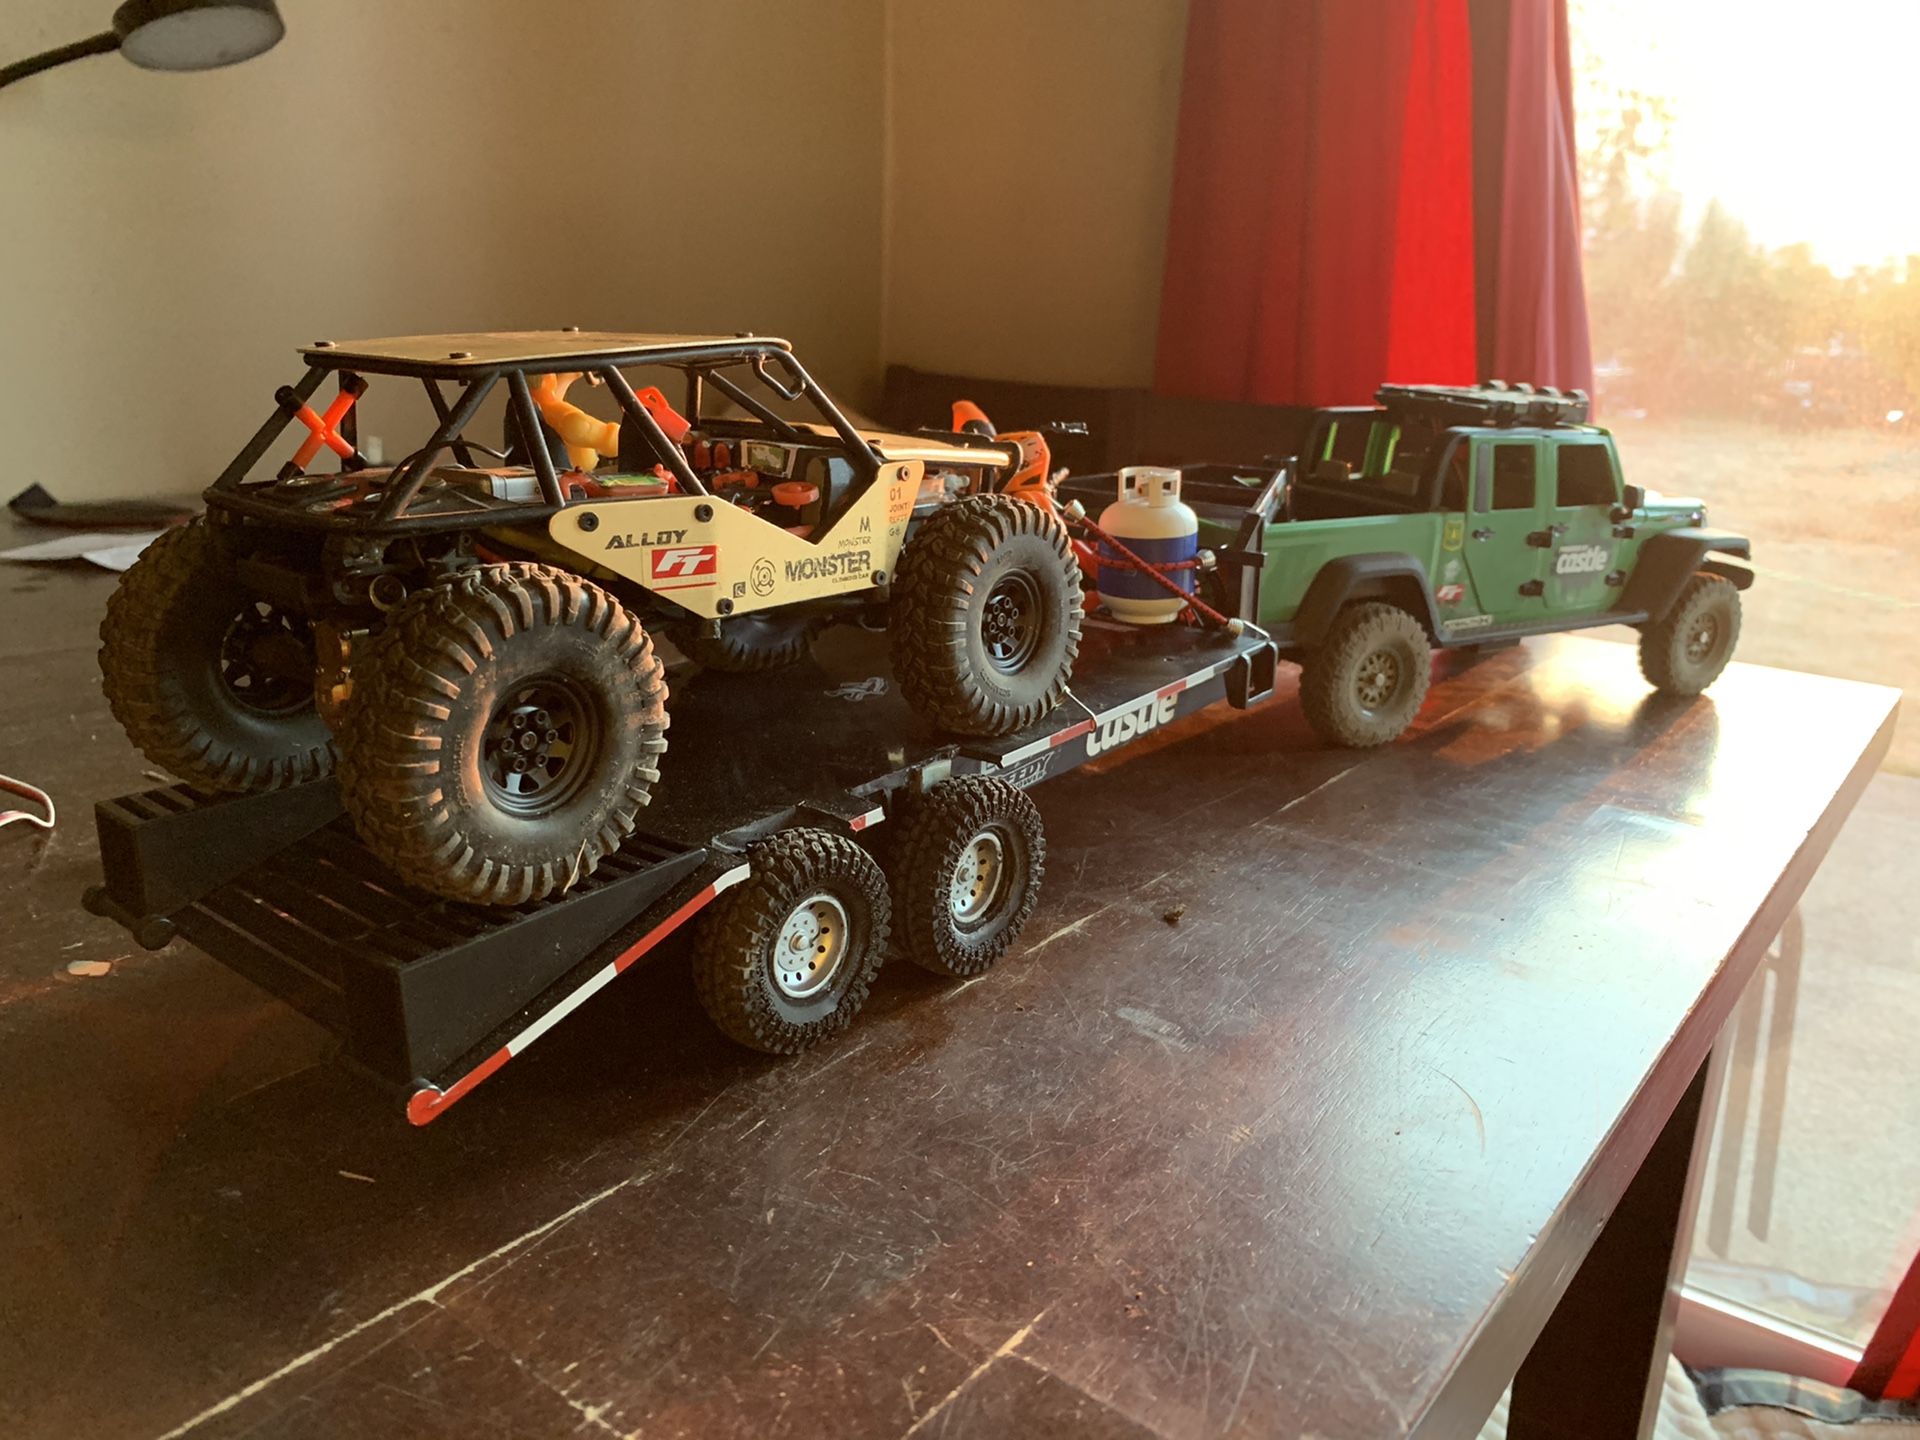 Gladiator rc car with gooseneck trailer and rc buggy.